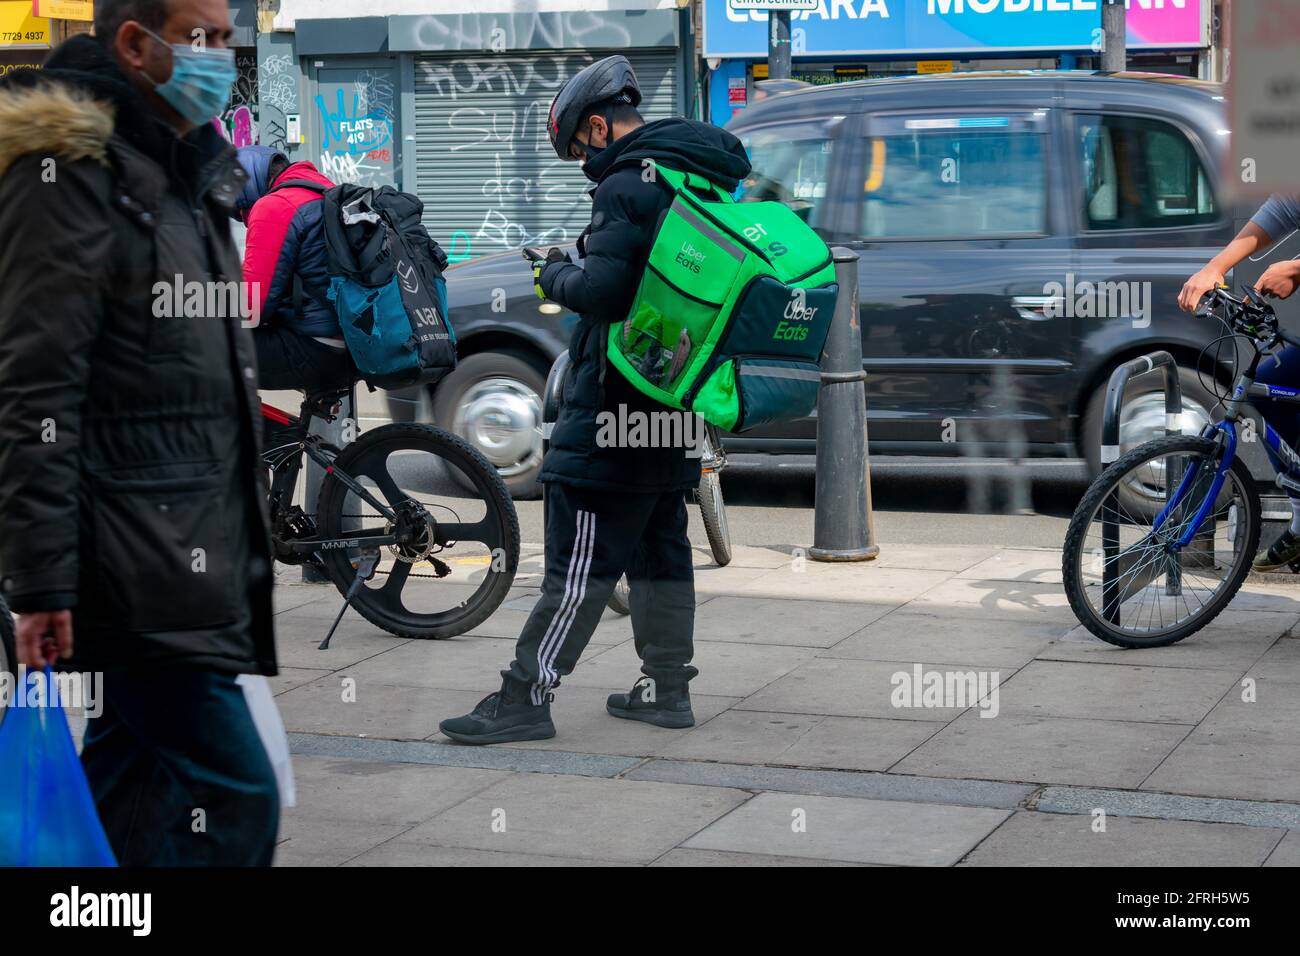 London. UK- 05.18.2021: young men working as self employed riders for online food ordering companies waiting for their next job notice on his phone. Stock Photo